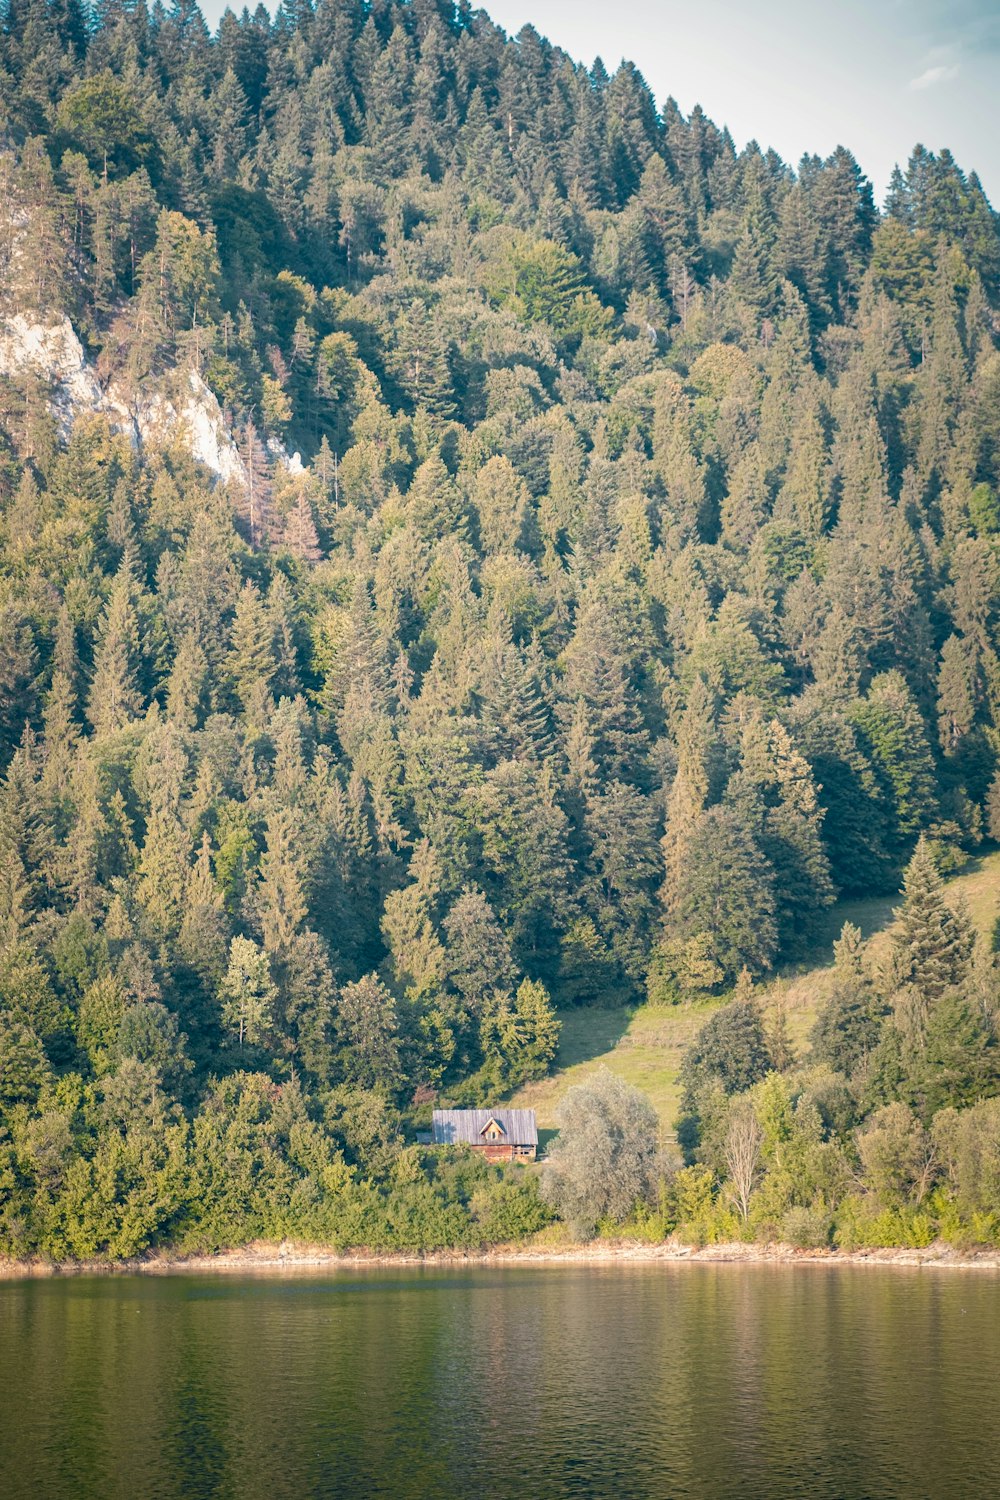 a house on the side of a mountain near a body of water